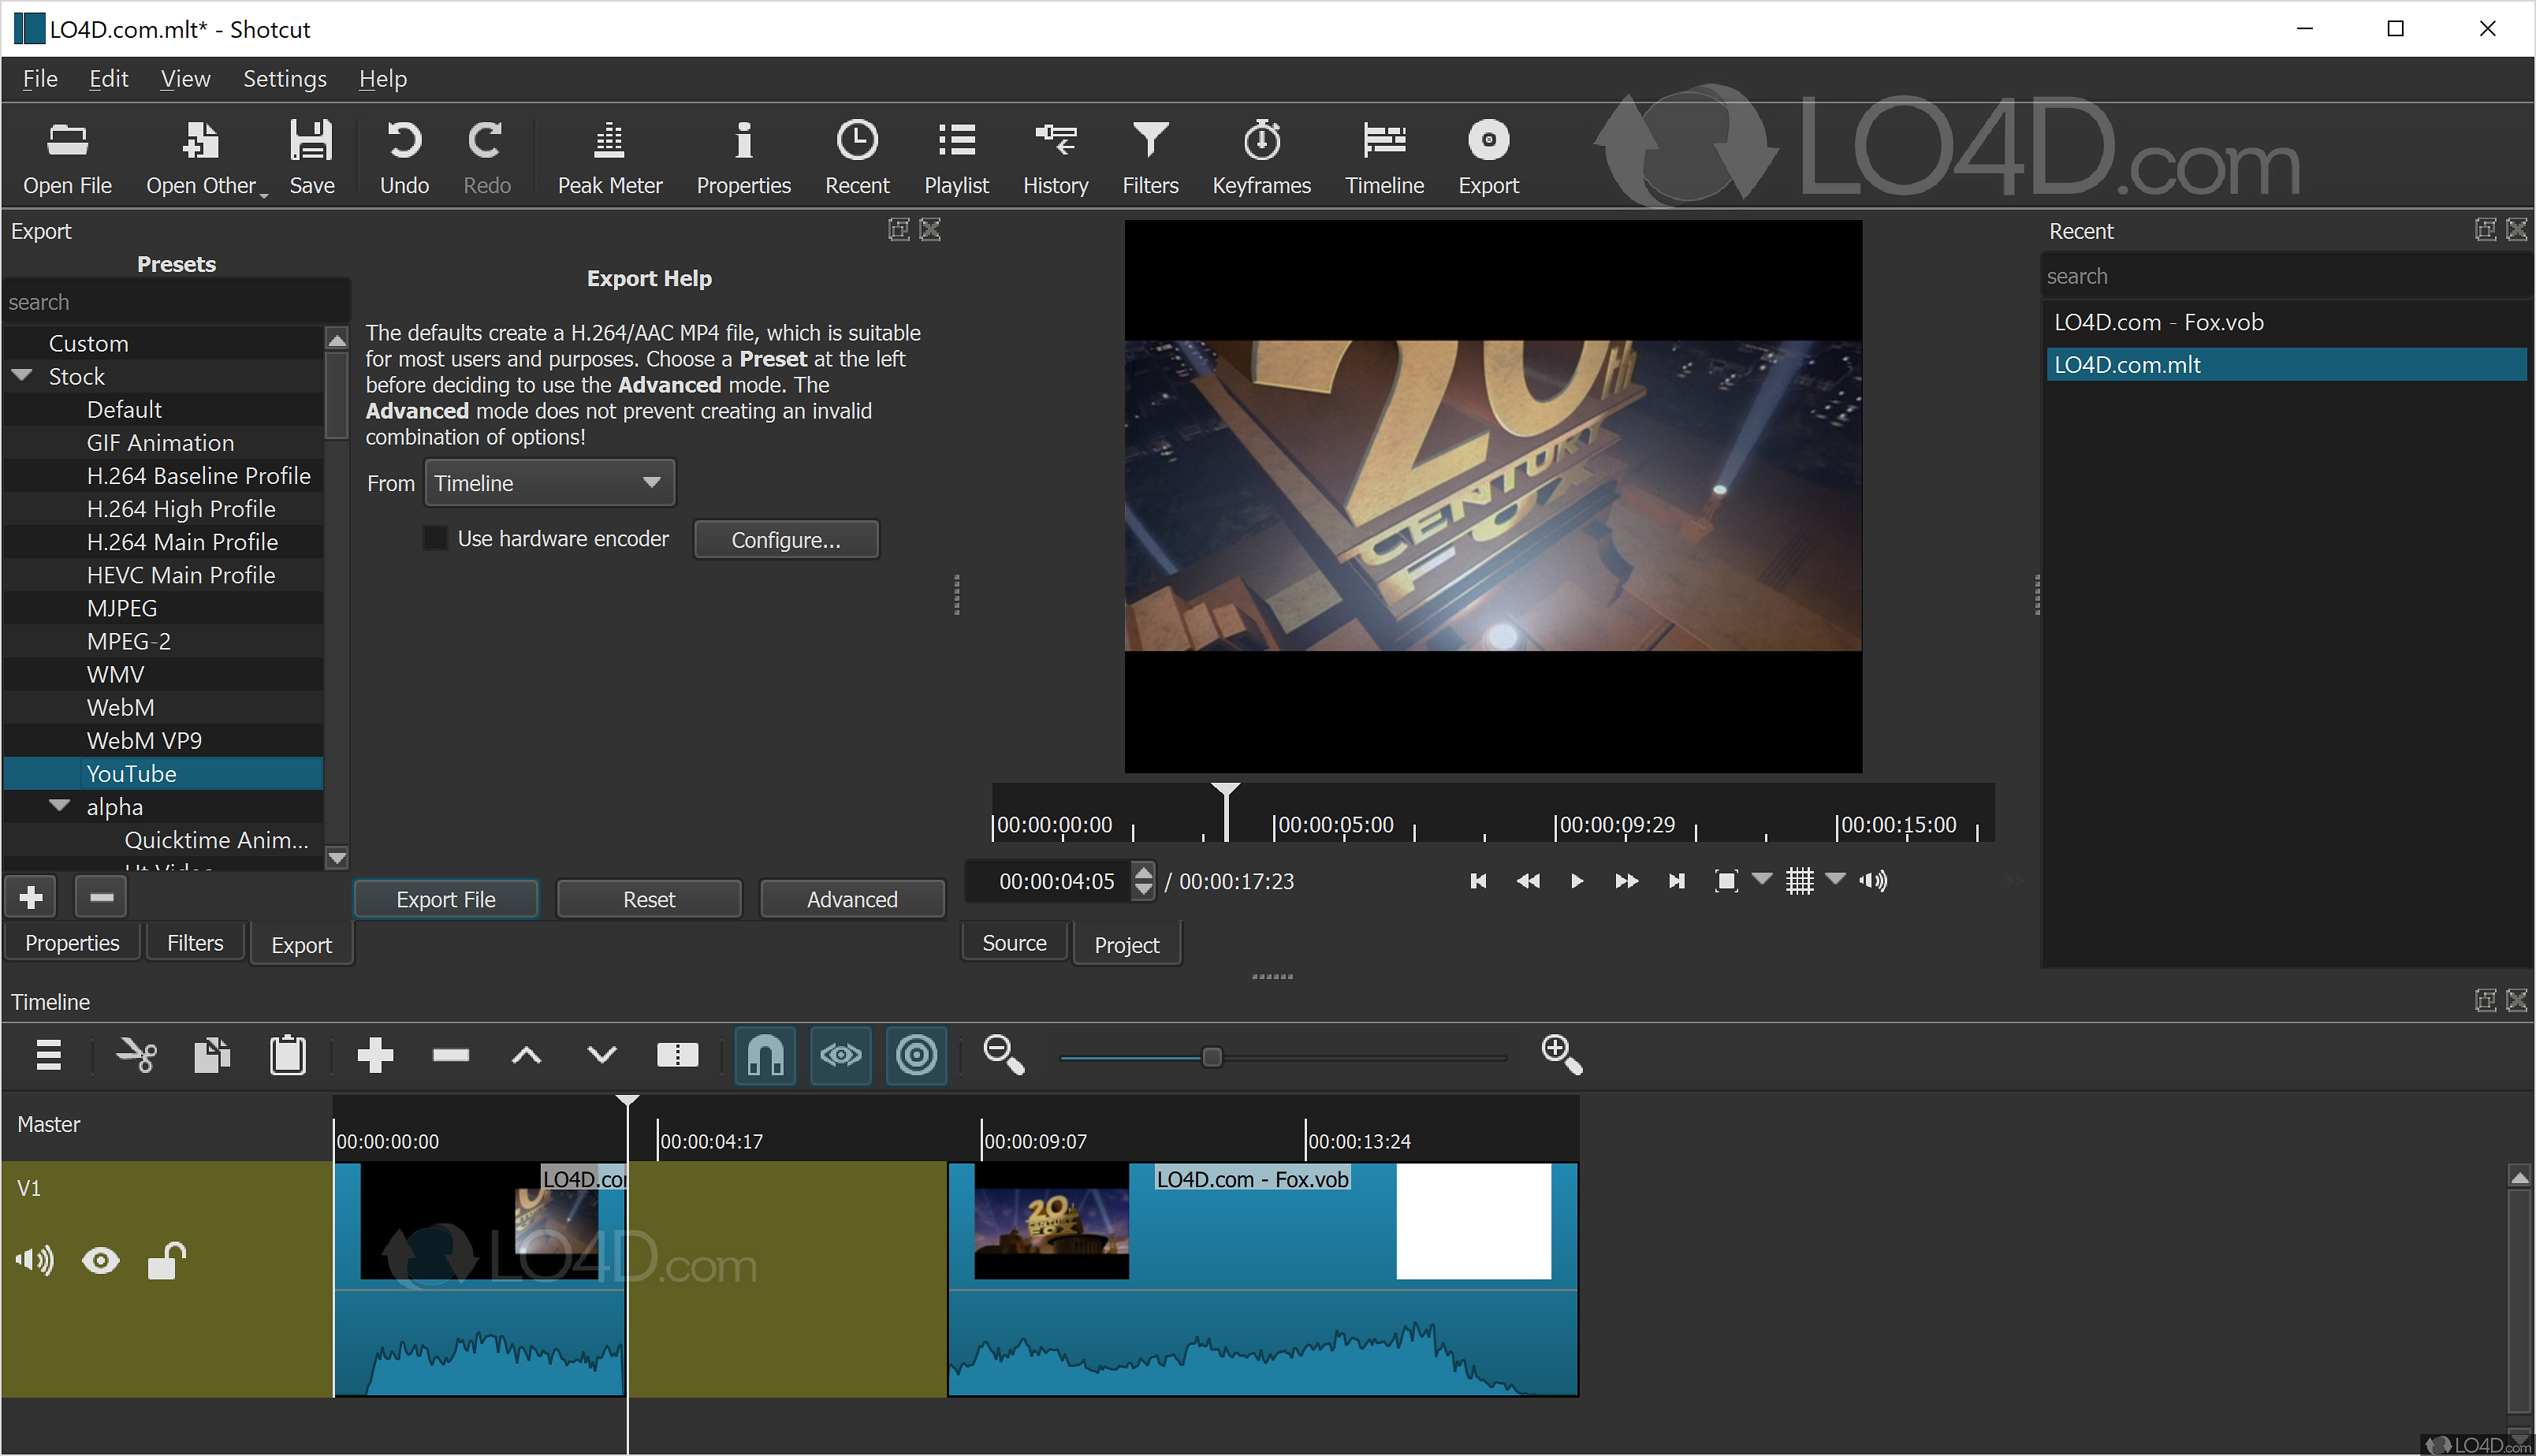 shotcut video editor for pc